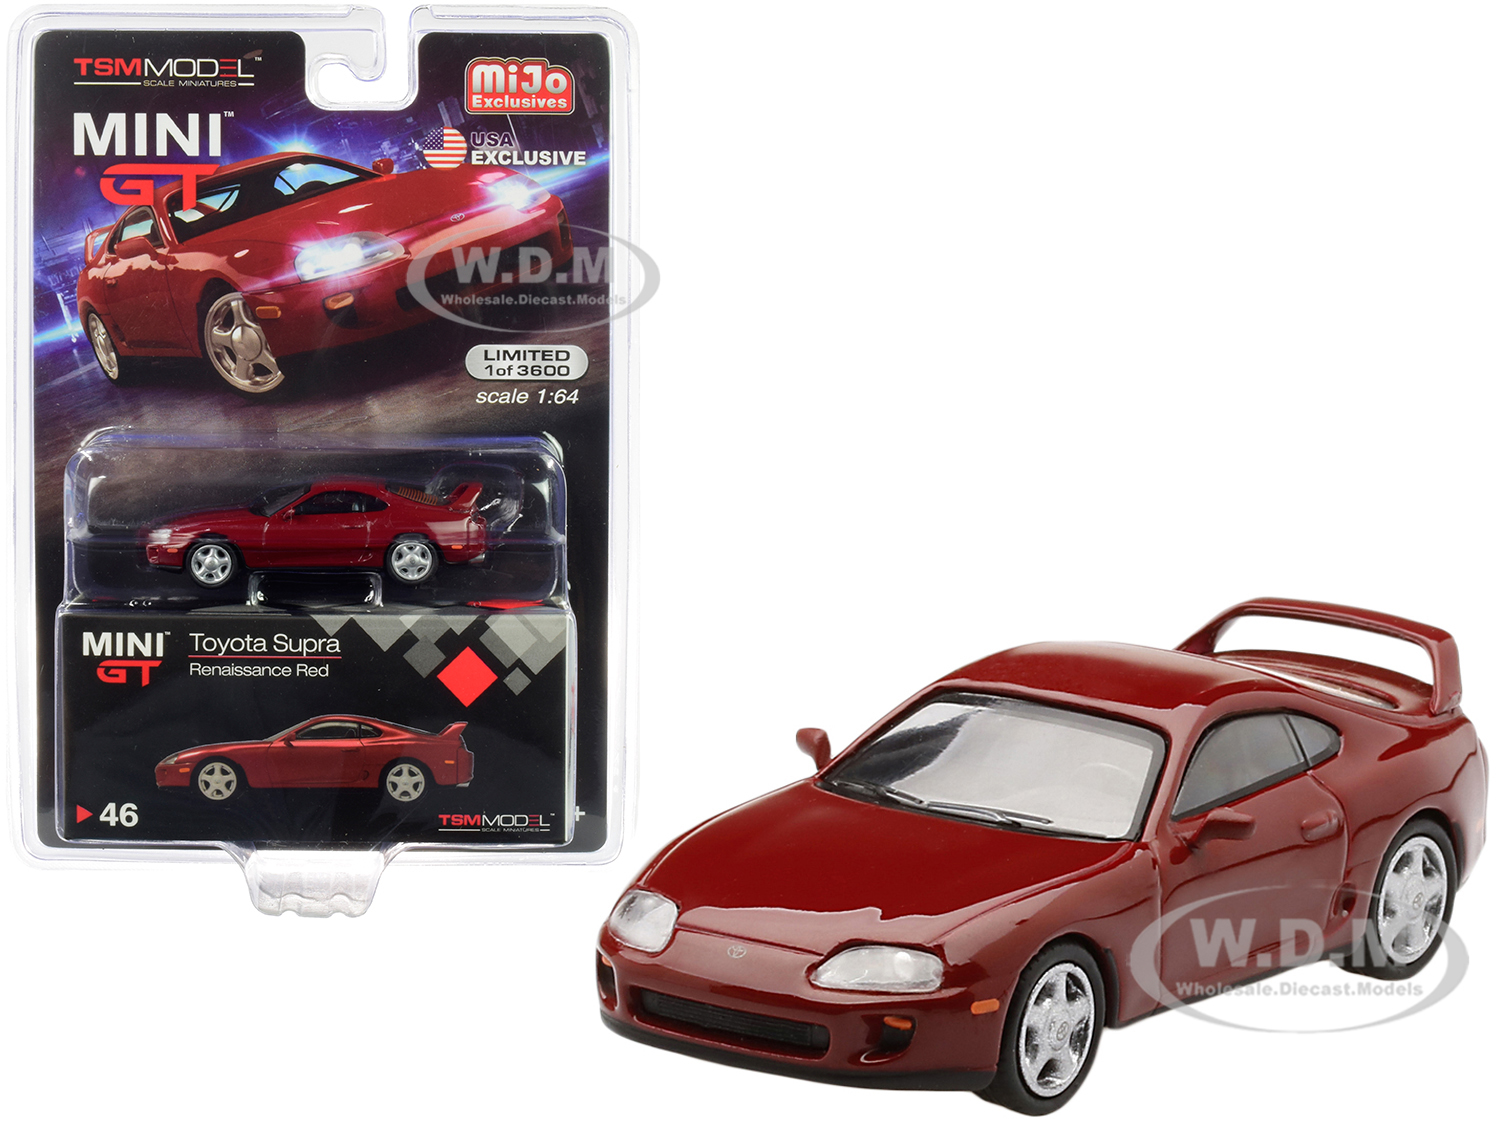 Toyota Supra (jza80) Lhd (left Hand Drive) Renaissance Red Limited Edition To 3600 Pieces Worldwide 1/64 Diecast Model Car By True Scale Miniatures